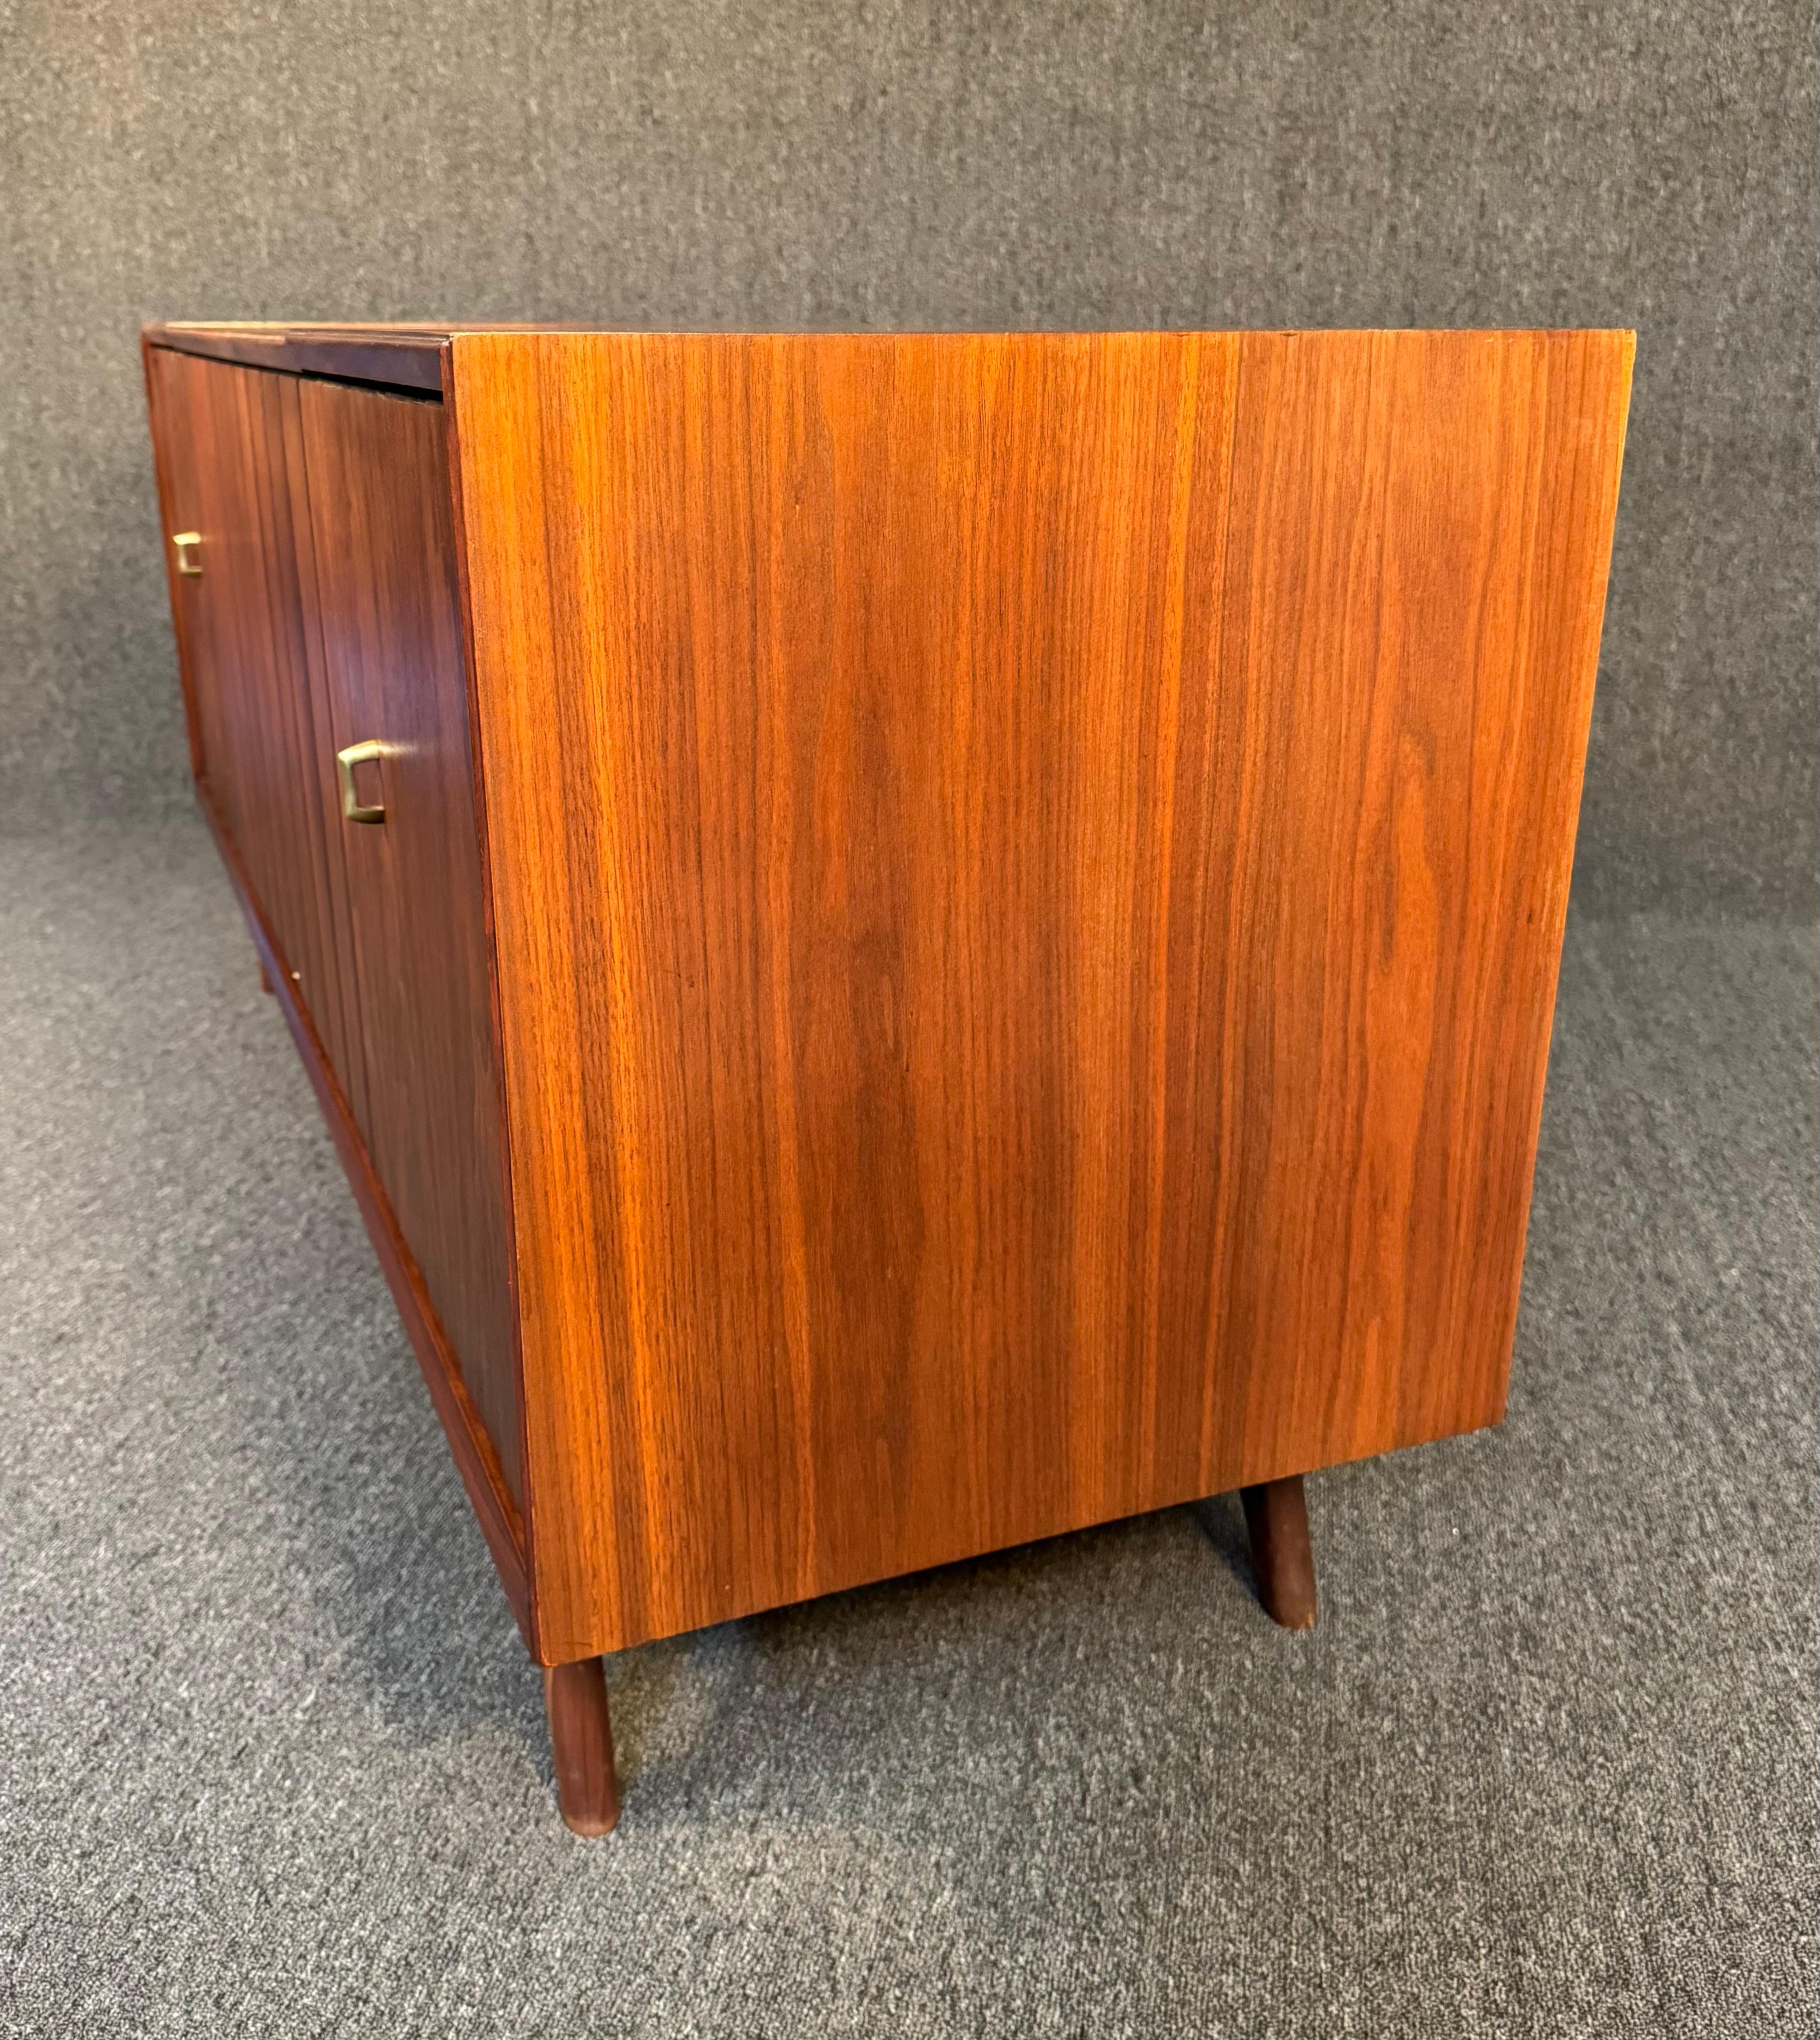 Vintage Mid Century Modern Walnut Zenith Stereo Console For Sale 3